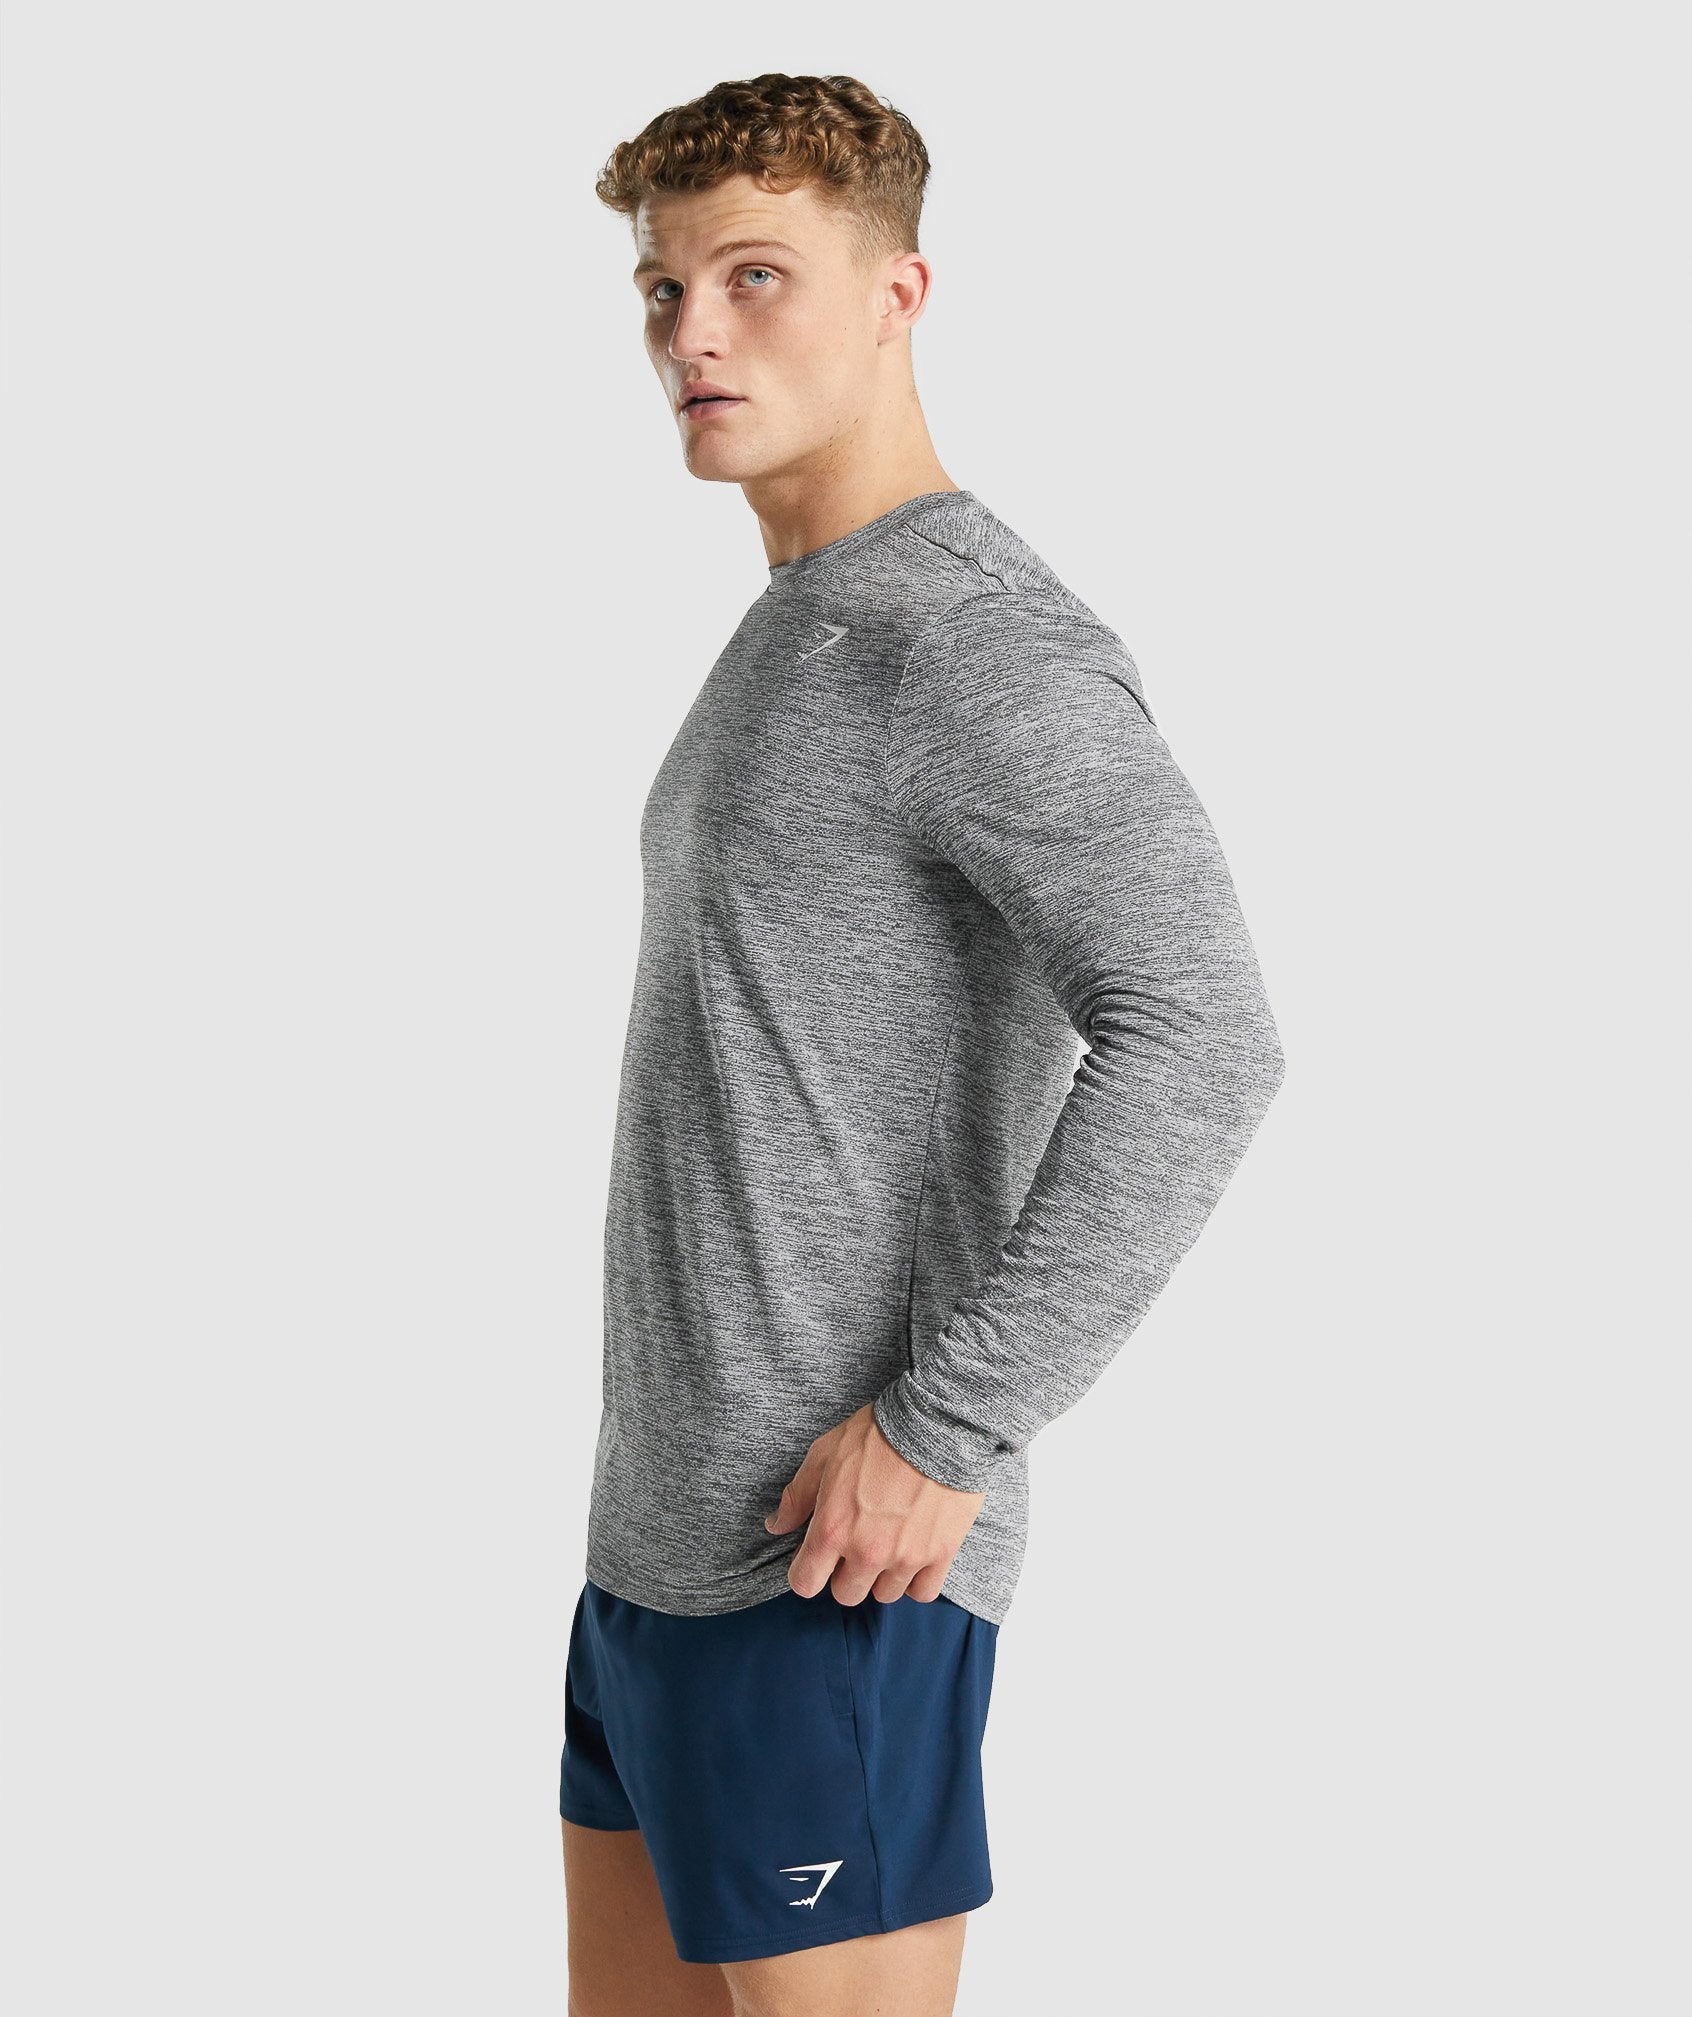 Arrival Marl Long Sleeve T-Shirt in Charcoal Marl